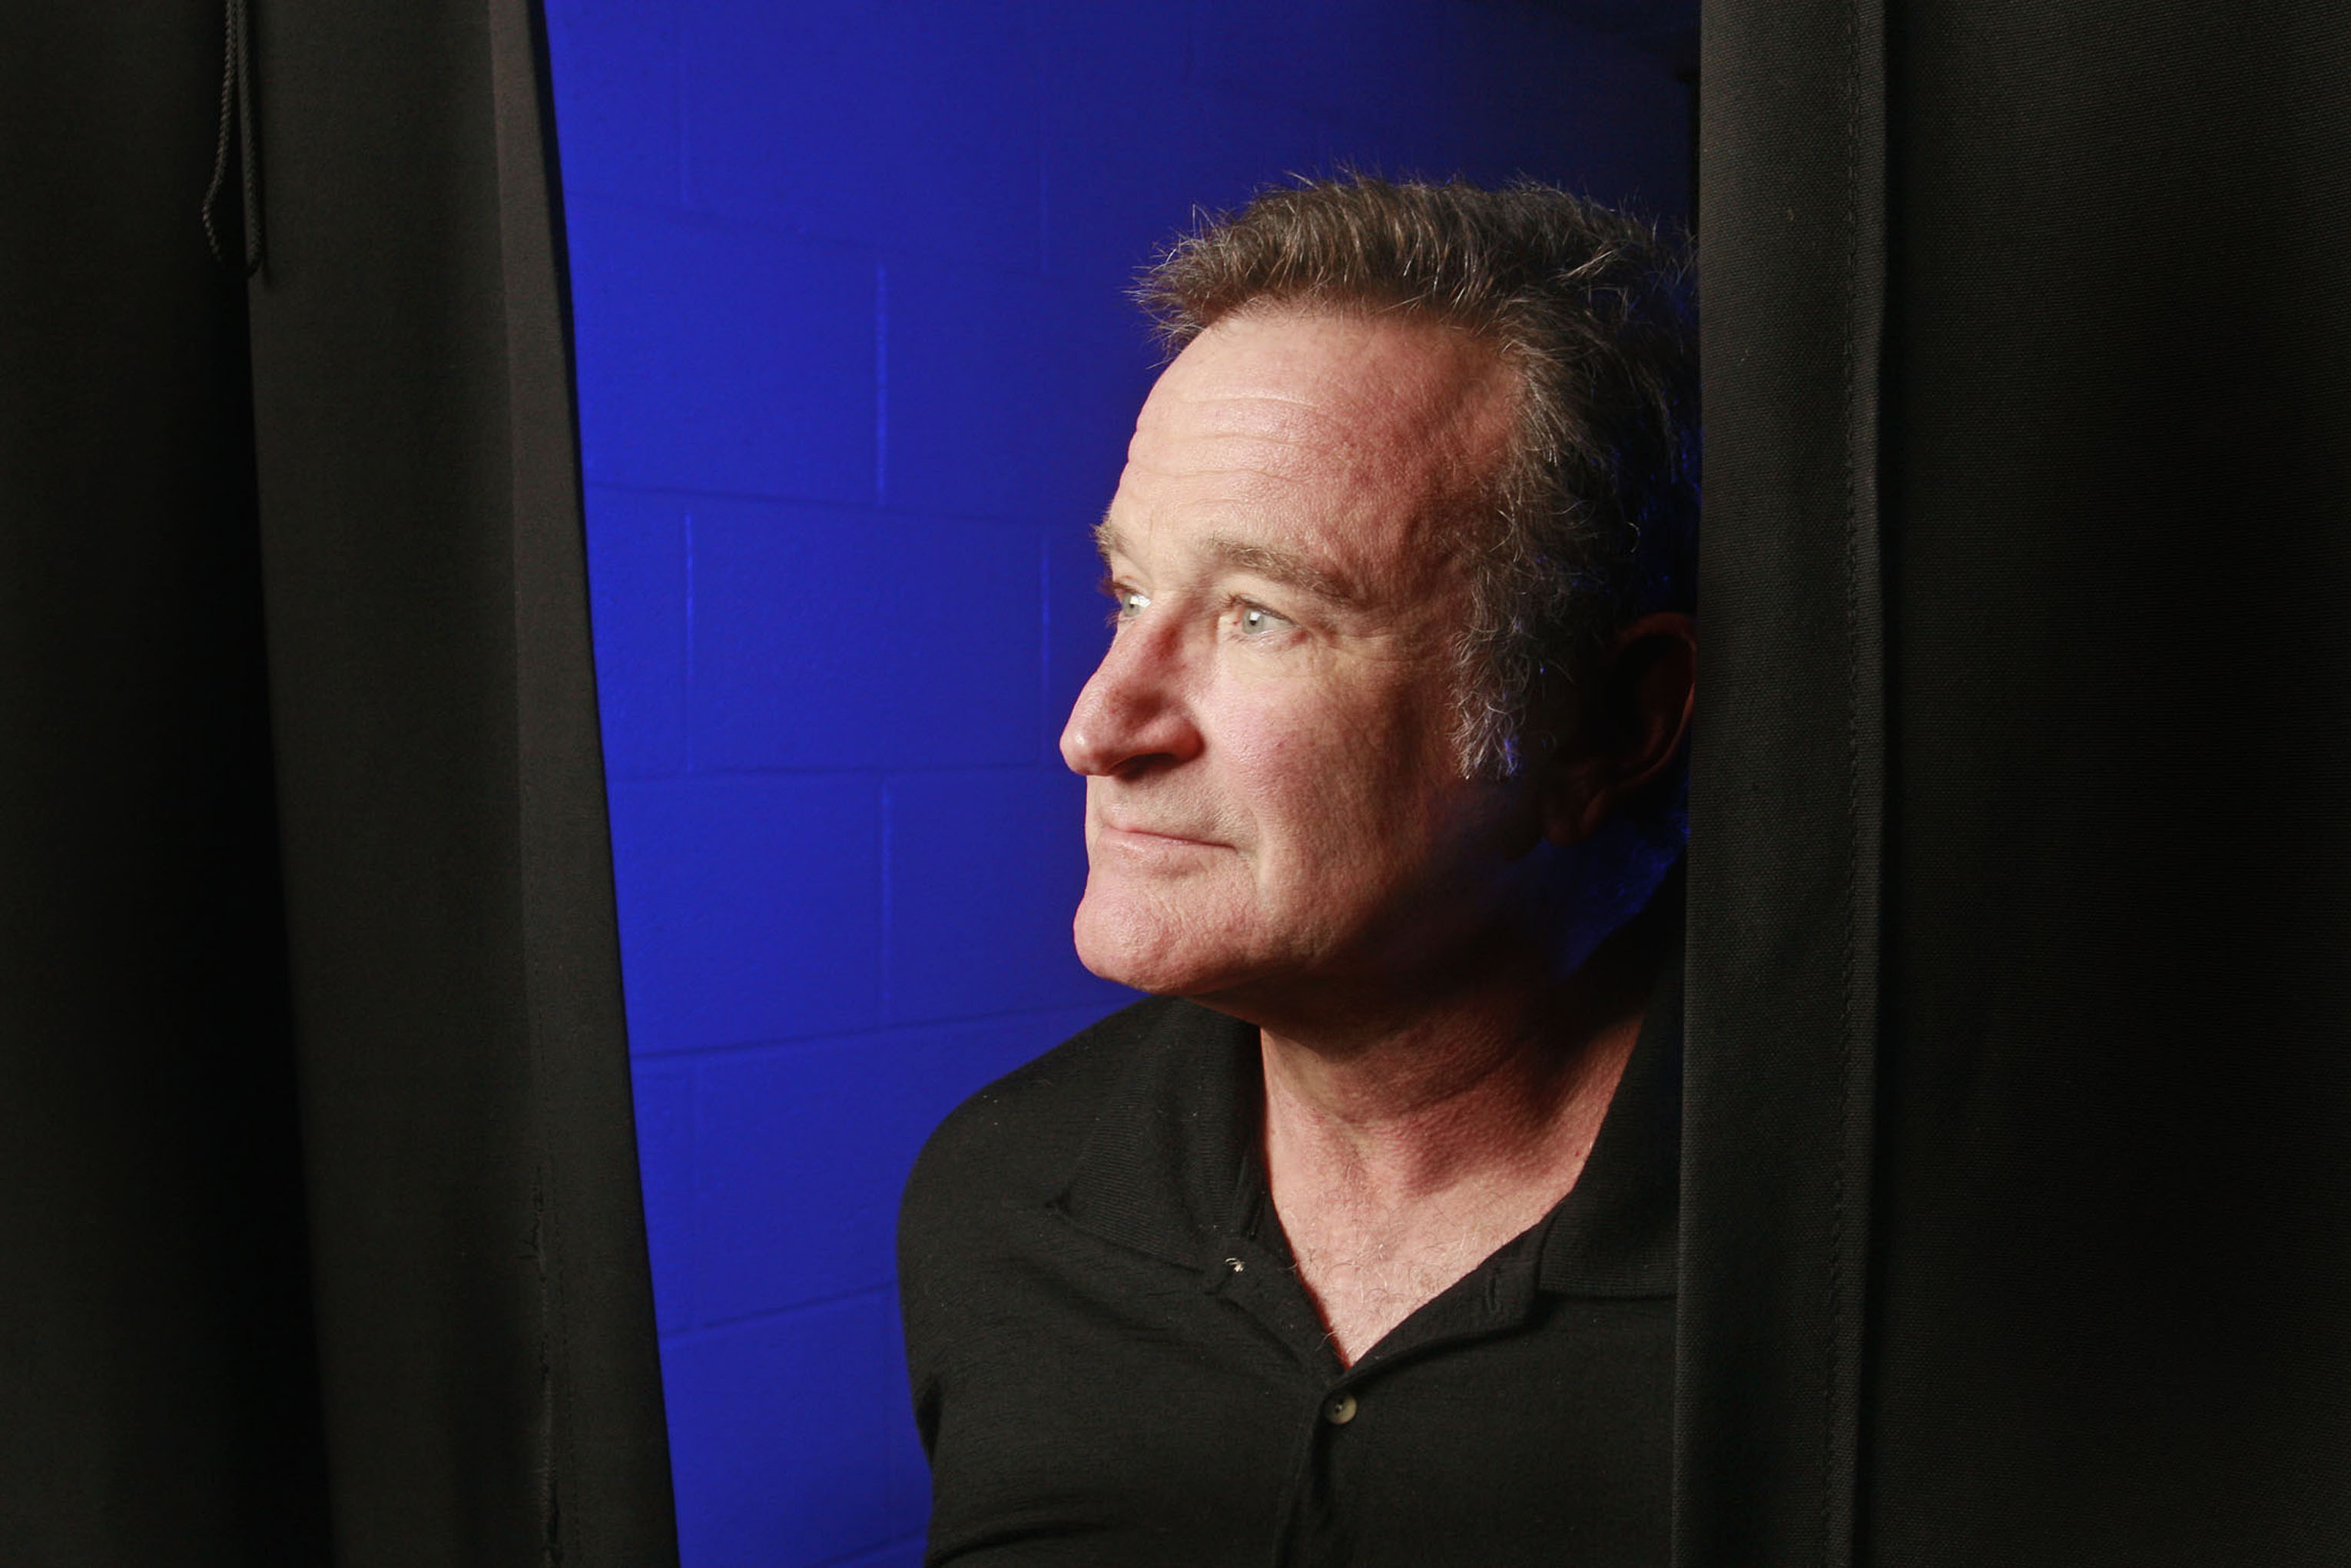 The actor and comedian Robin Williams, who committed suicide on August 11, 2014 (Jay Paul&mdash;Getty Images)